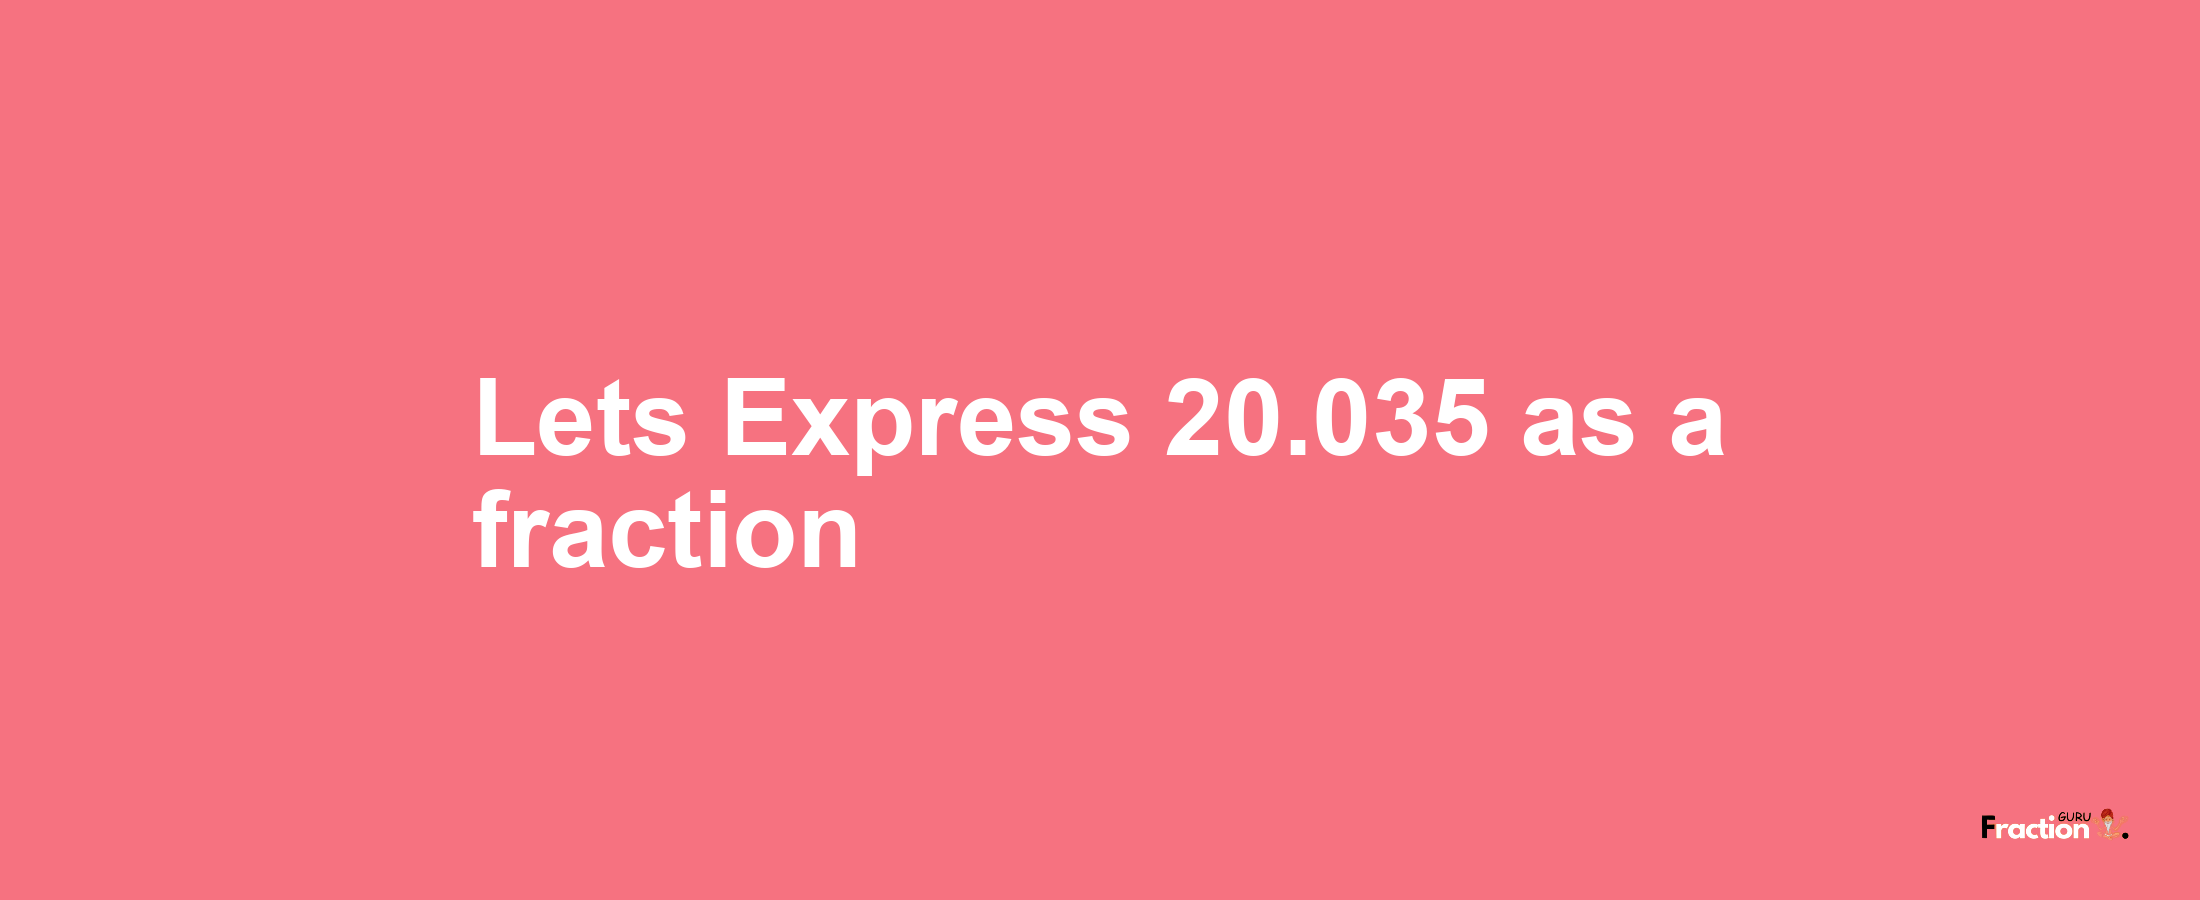 Lets Express 20.035 as afraction